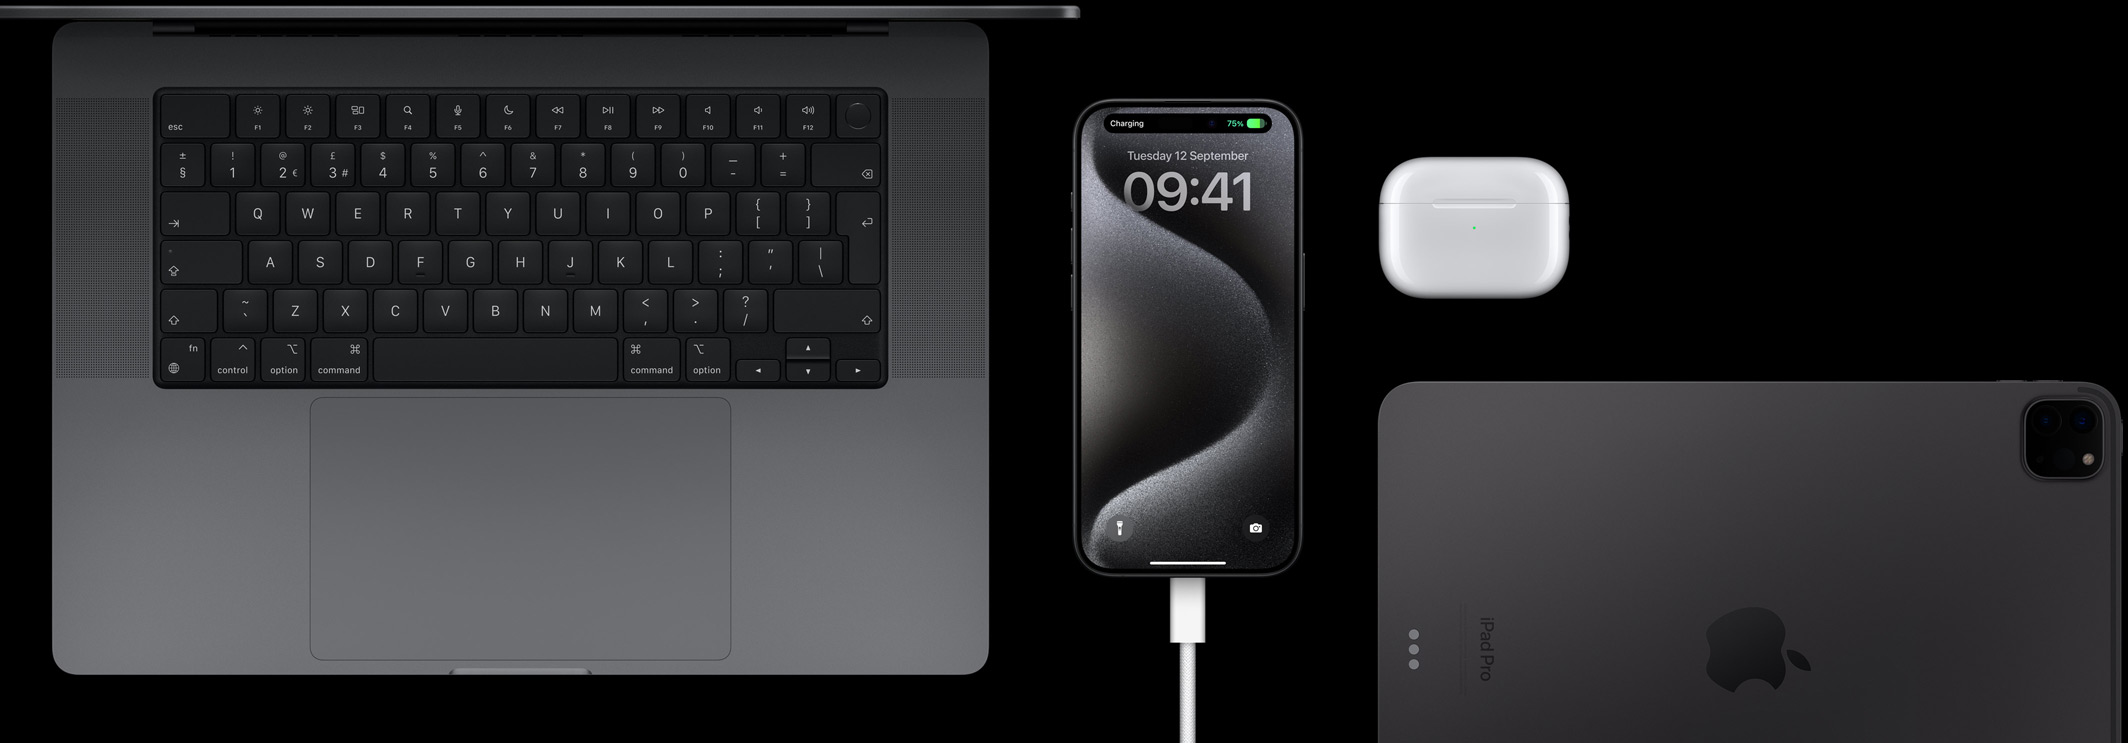 iPhone 15 Pro with a USB-C cable plugged into it, surrounded by a MacBook Pro, AirPods Pro and iPad